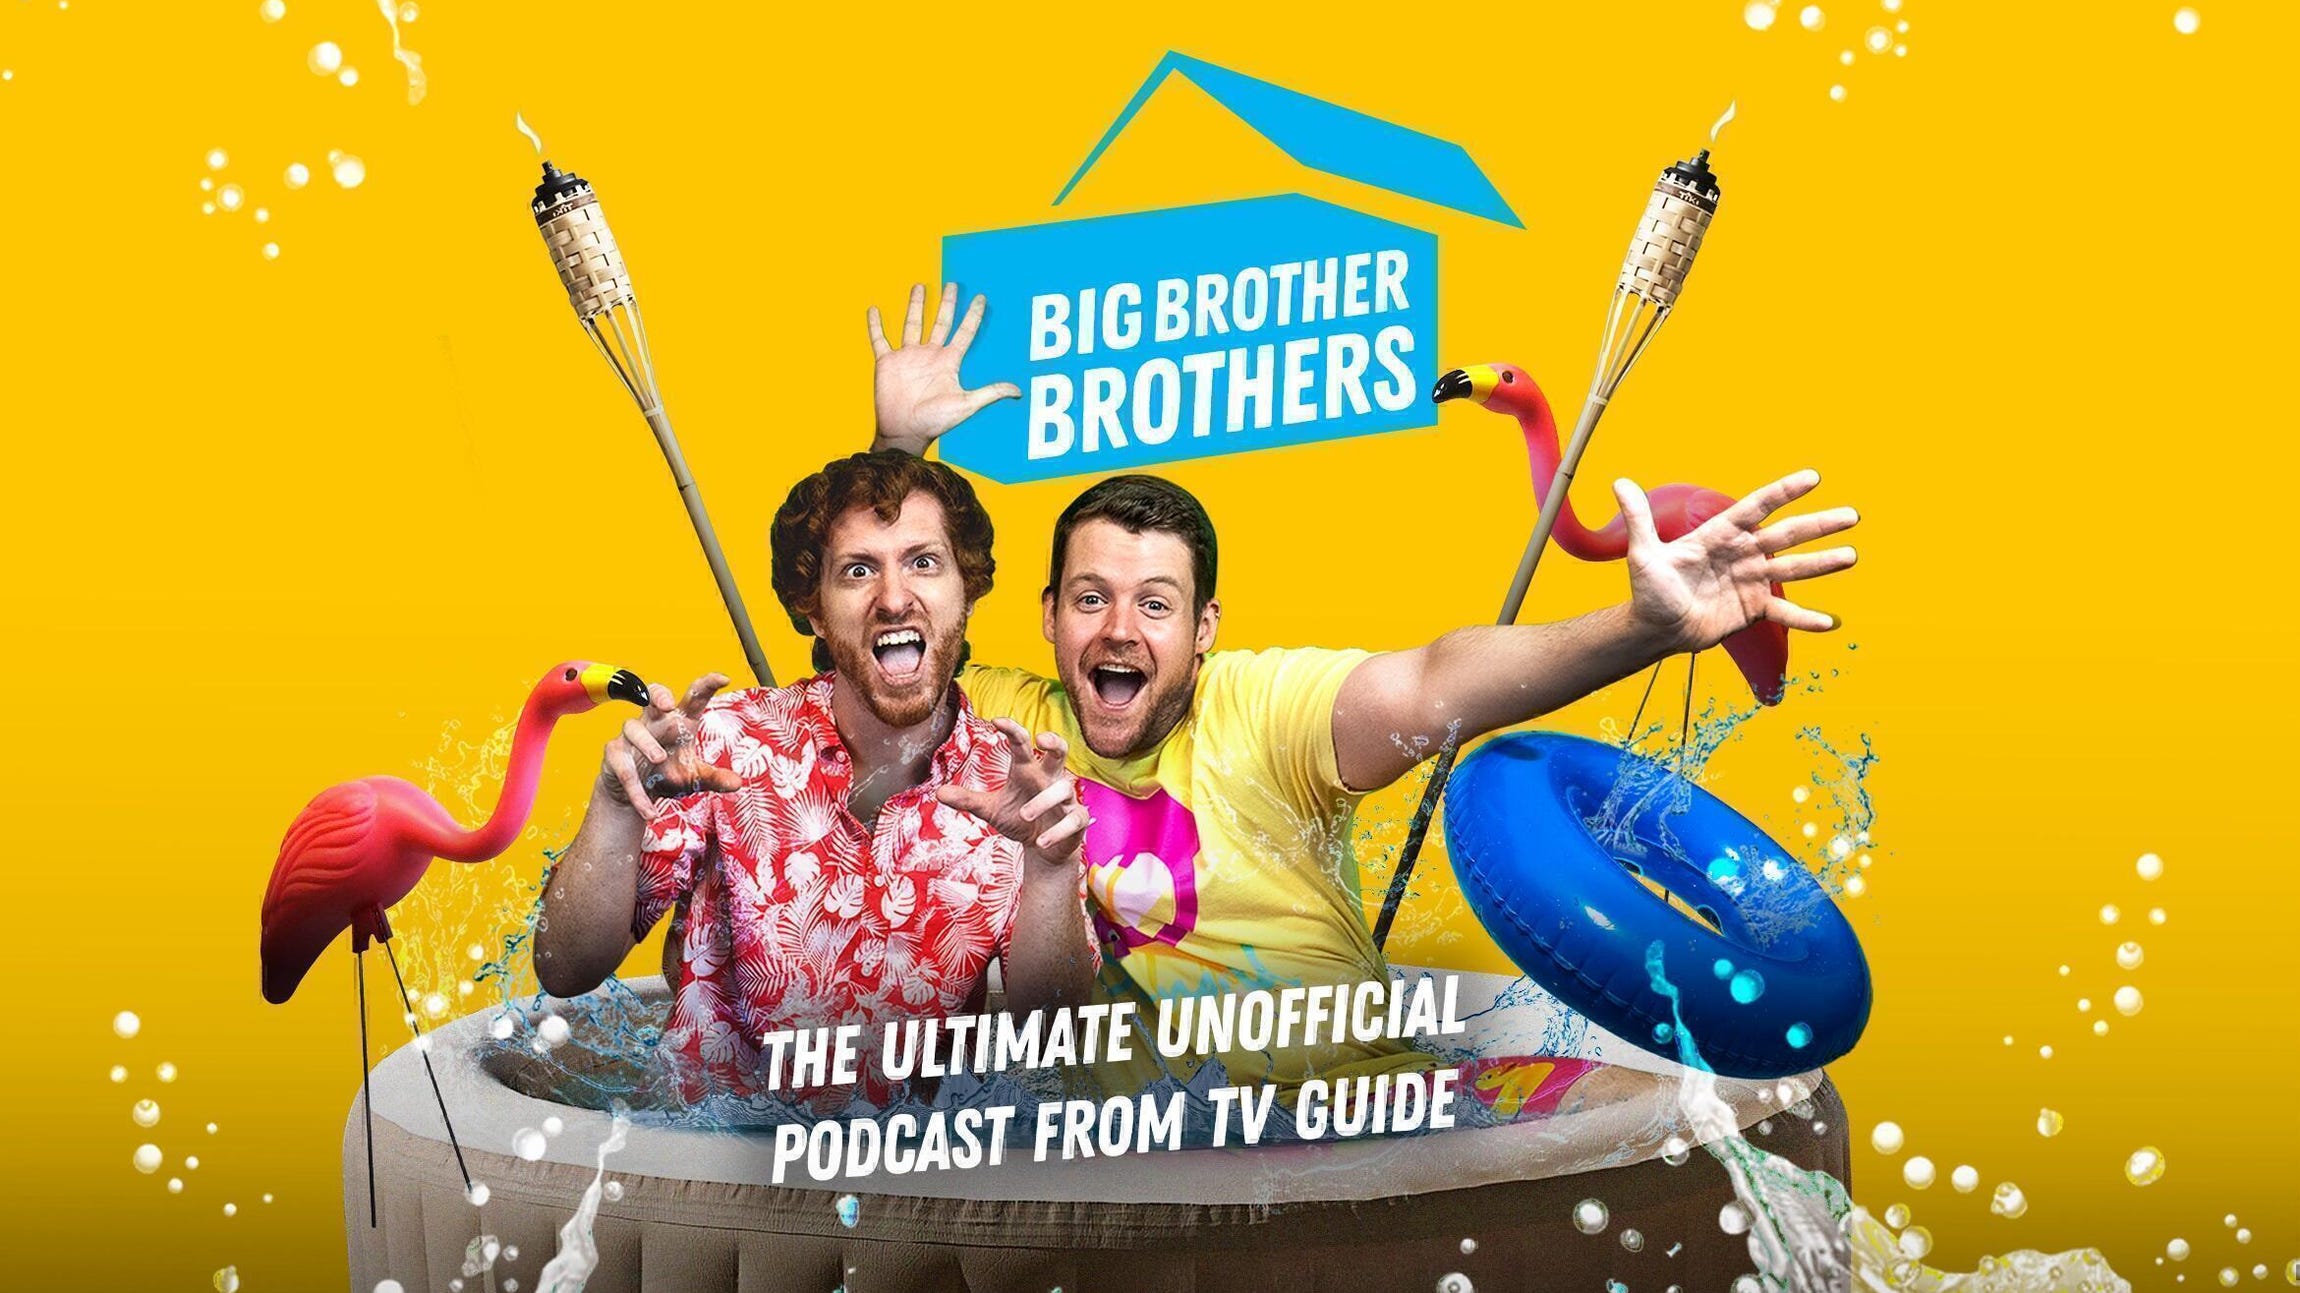 Big Brother Brothers: The Ultimate Unofficial Podcast From TV Guide